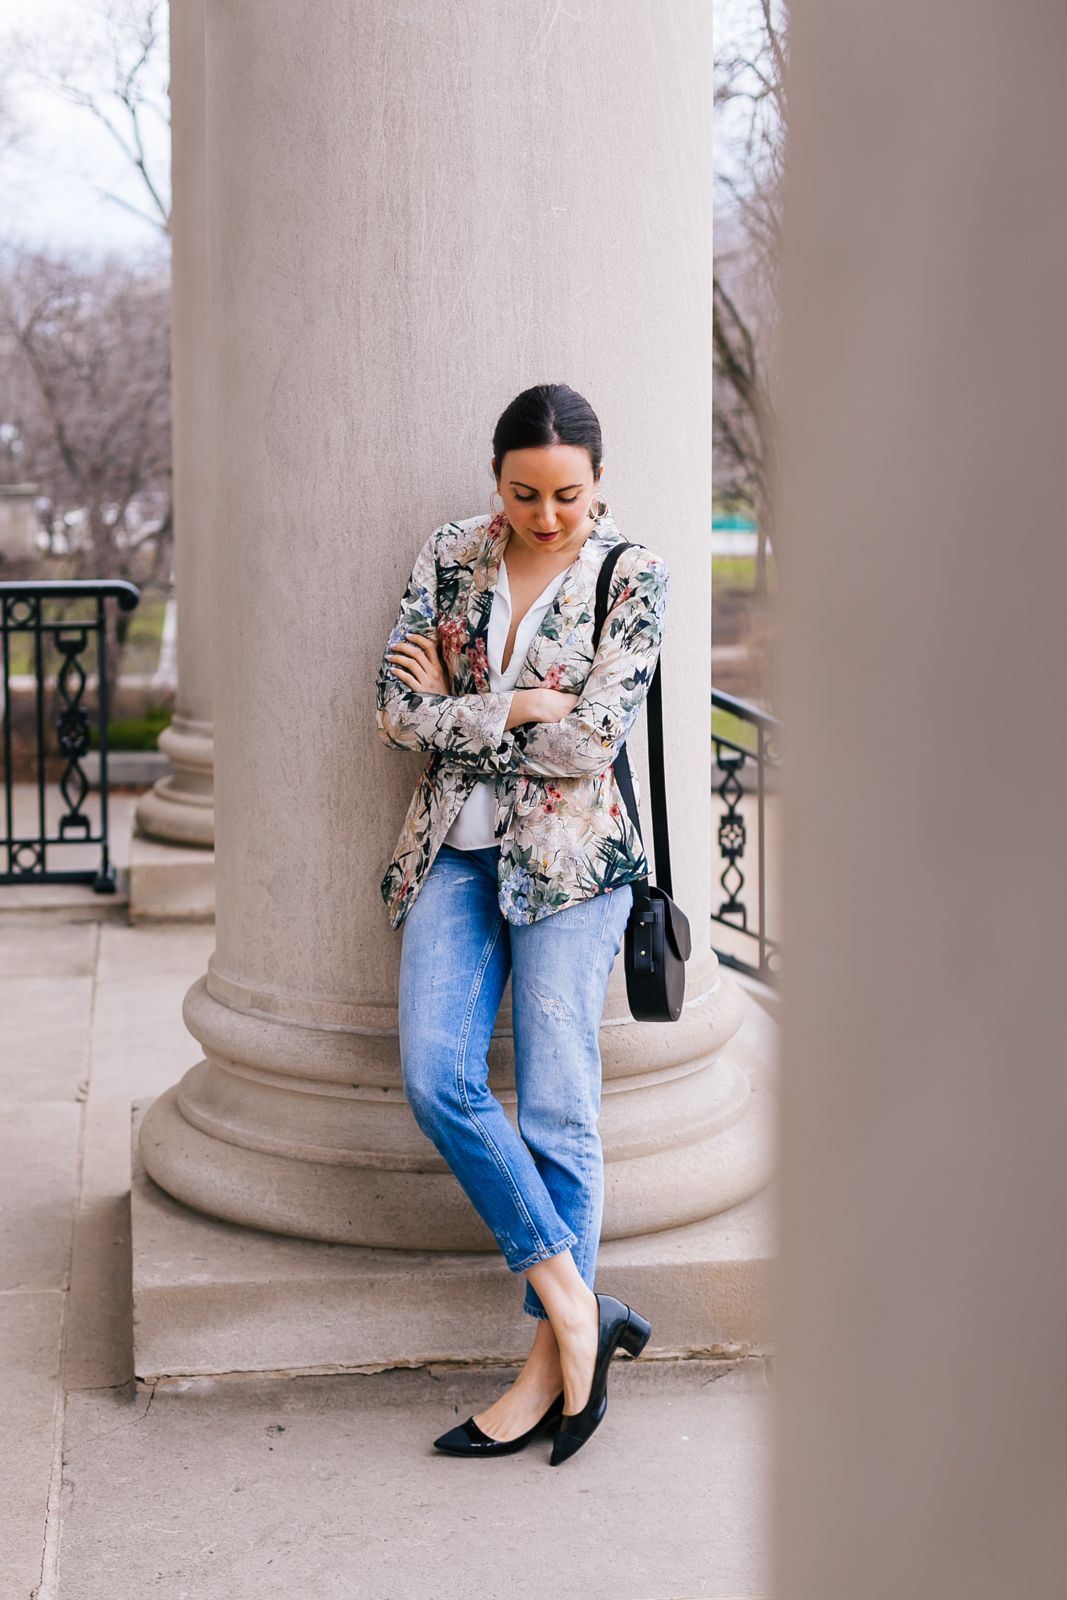 Yana Frigelis of NoMad Luxuries wearing a floral blazer from Zara with boyfriends jeans and black accessories for Spring 